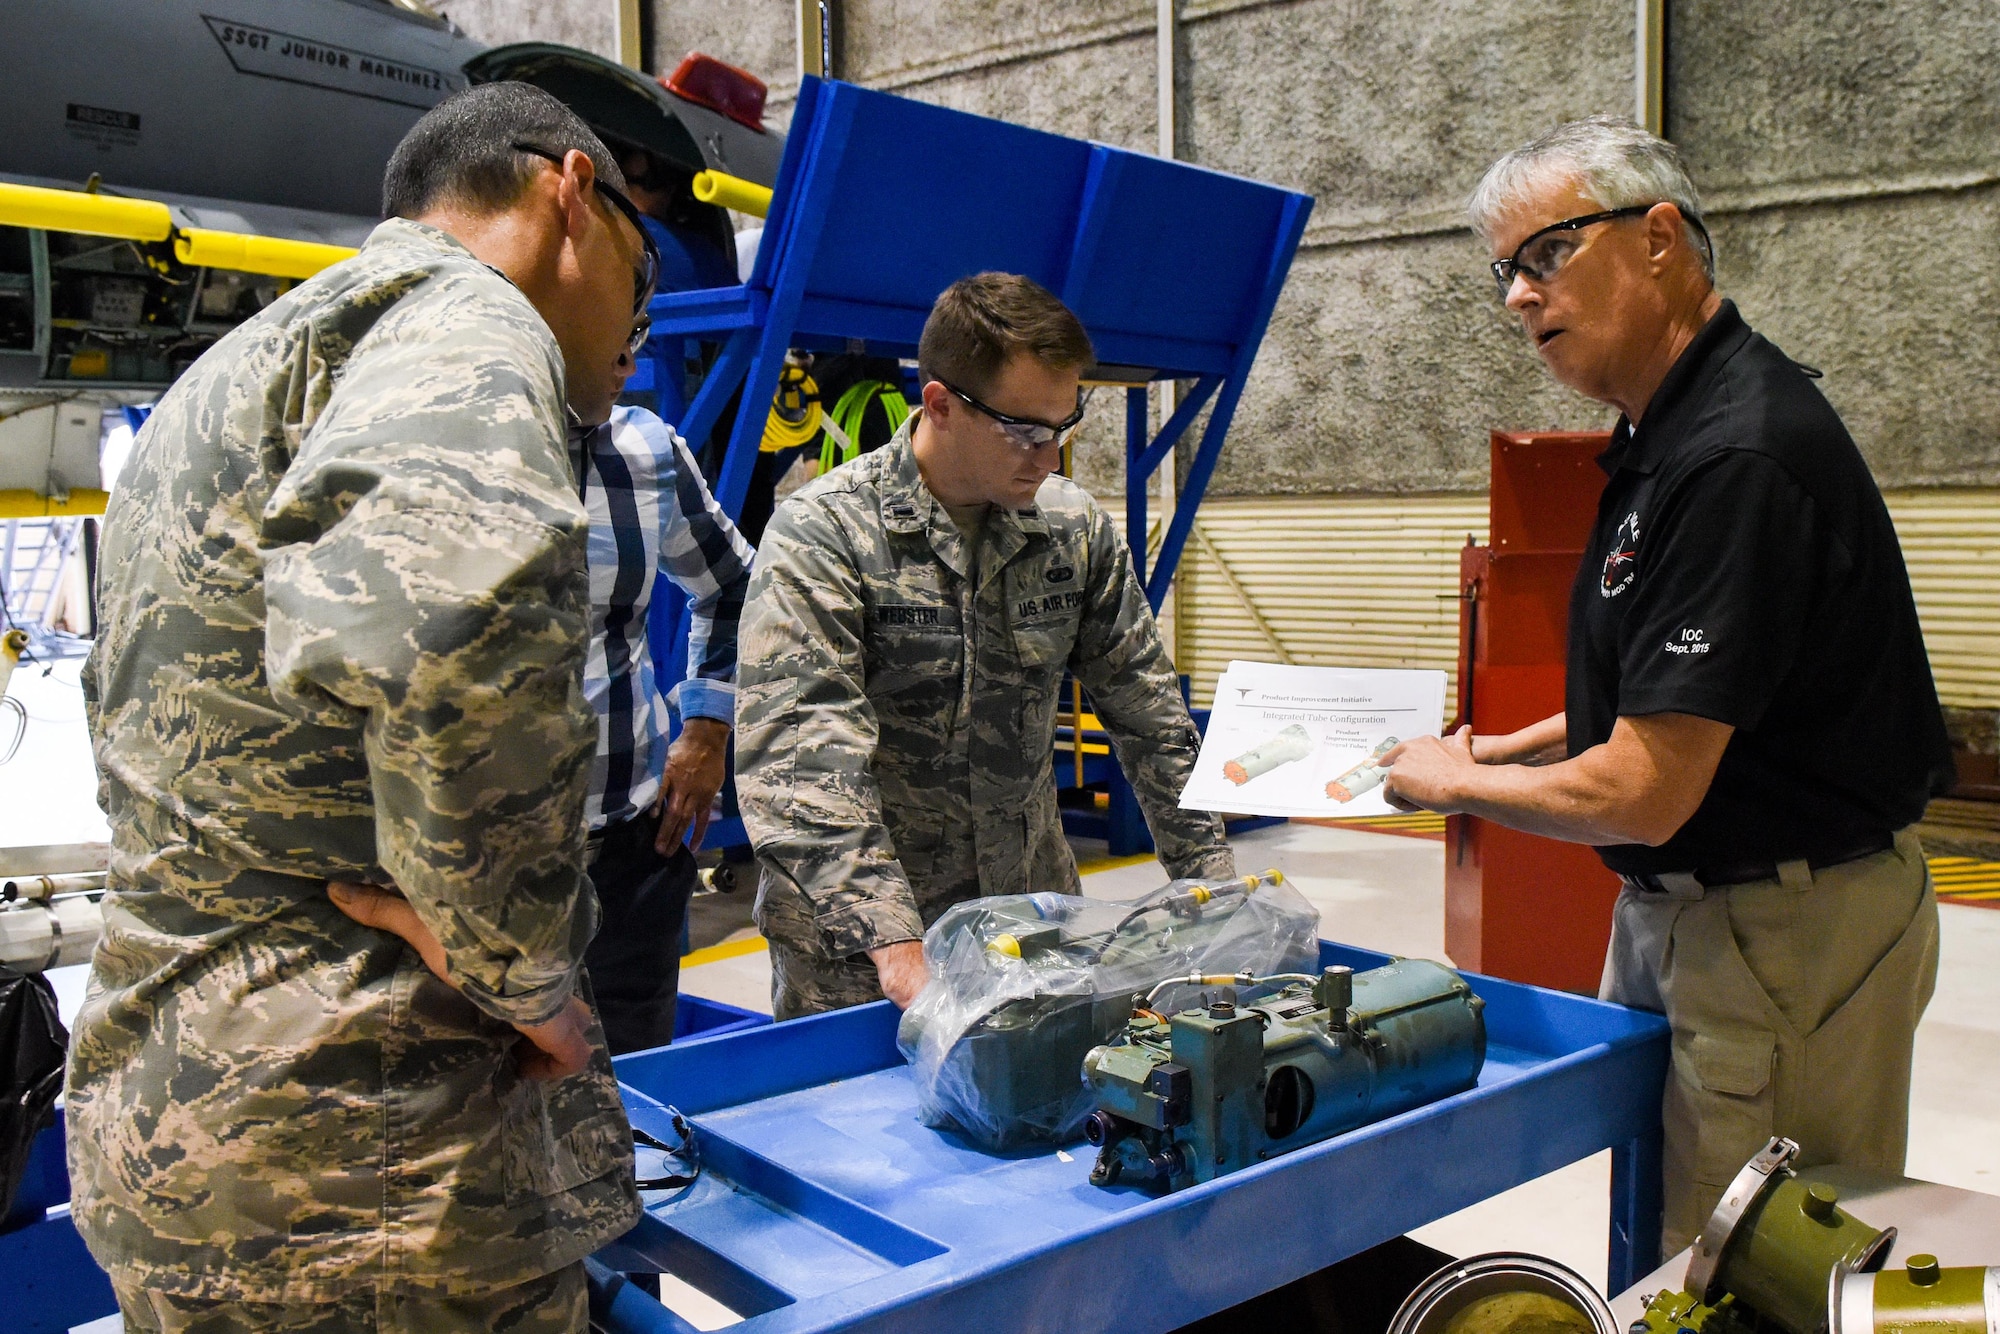 Kevin Kelly (right), Boeing Co. Radar Modernization Program integrator, shows the group a liquid cooling pump from the F-15E Strike Eagle, Oct. 3, 2016, at Seymour Johnson Air Force Base, North Carolina. Boeing Co. is contracted to install the upgrade of a new radar system from the old legacy APG-70 mechanically-scanned radar to an active electronically-scanned radar system APG-82. (U.S. Air Force photo by Airman Shawna L. Keyes)